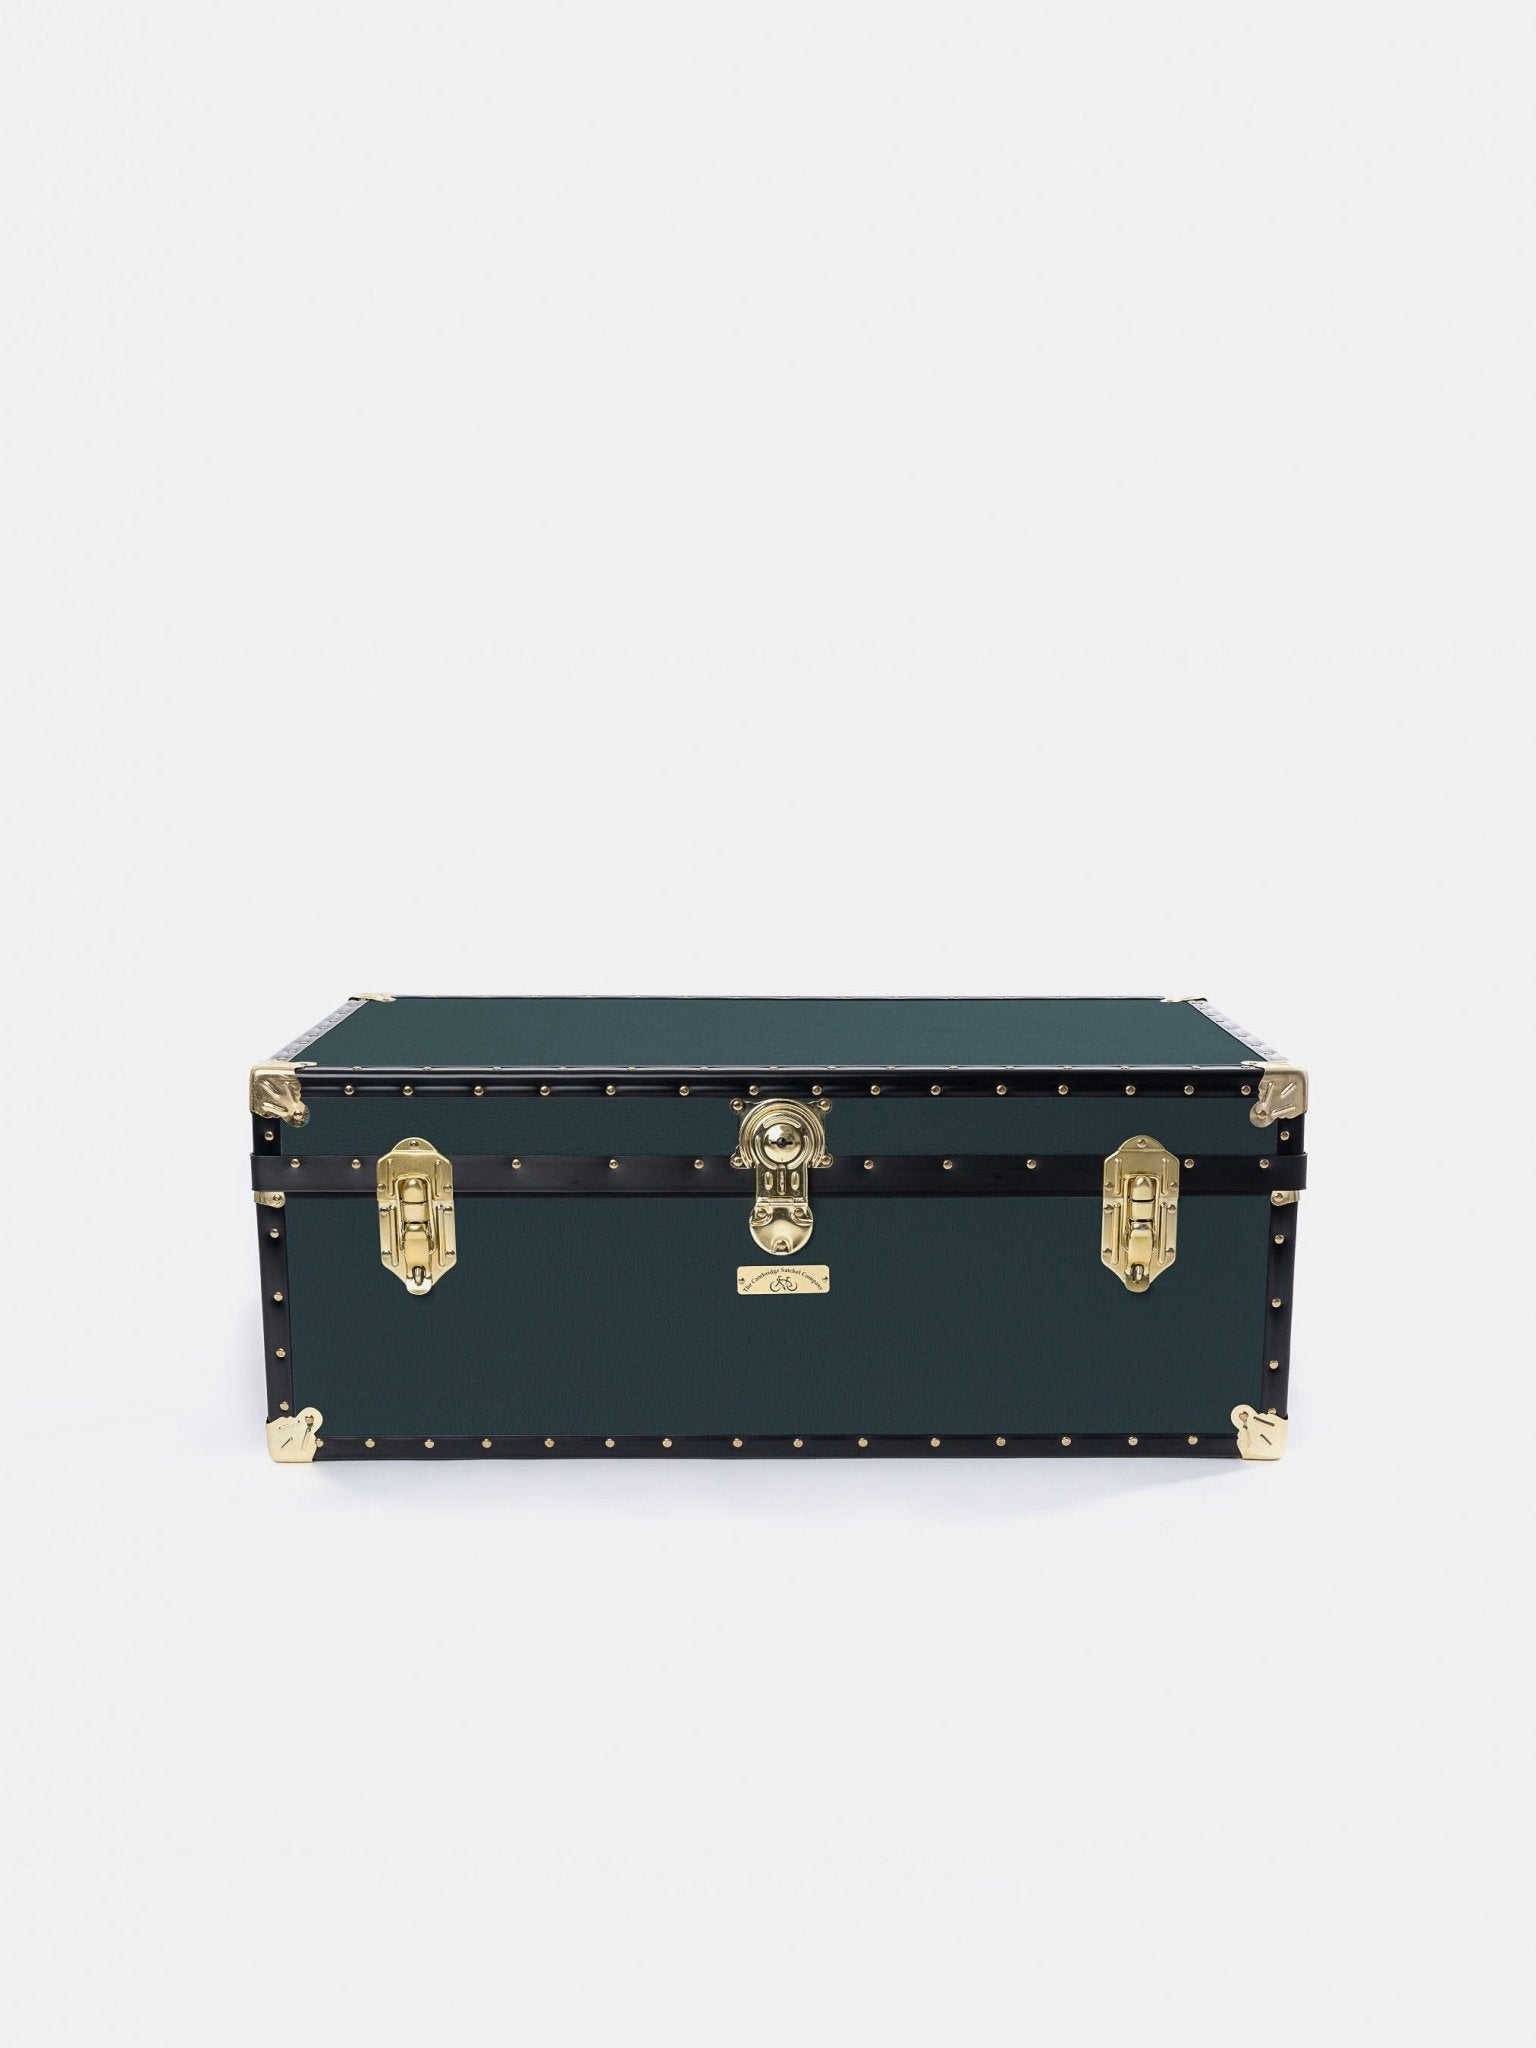 The Steamer Trunk - Forest Green - The Cambridge Satchel Company UK Store